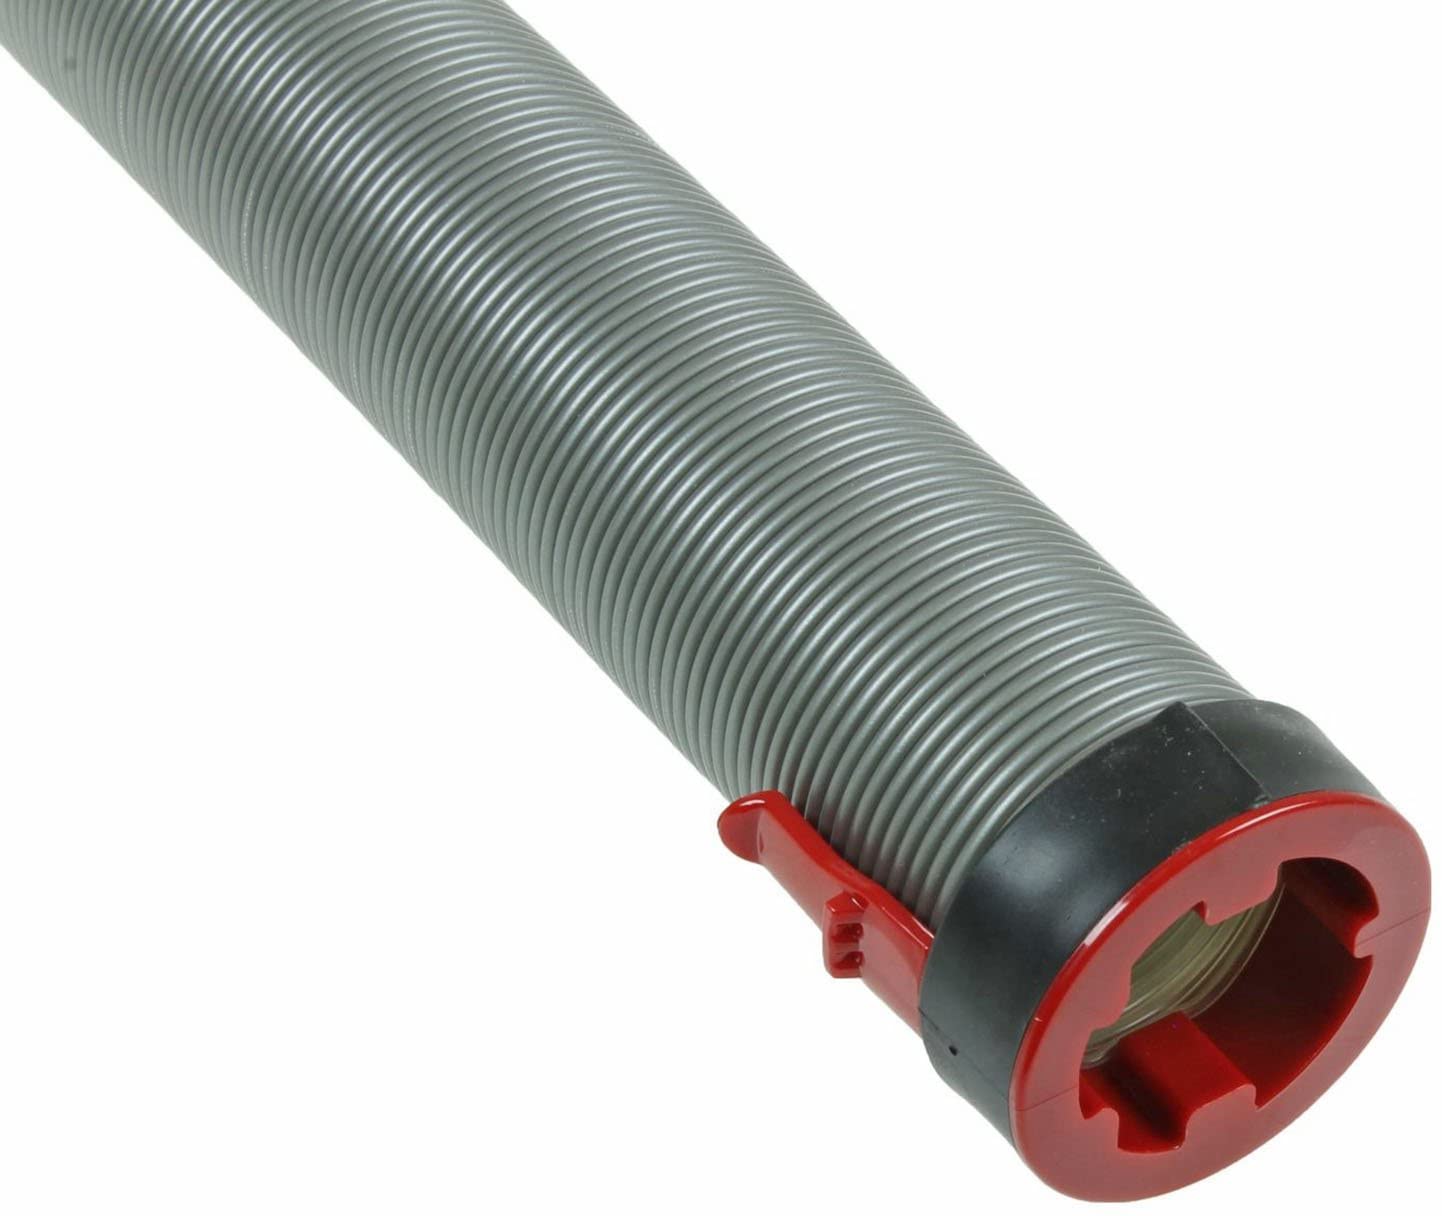 Stretch Hose for Dyson DC40 DC41 DC65 Vacuum Cleaner